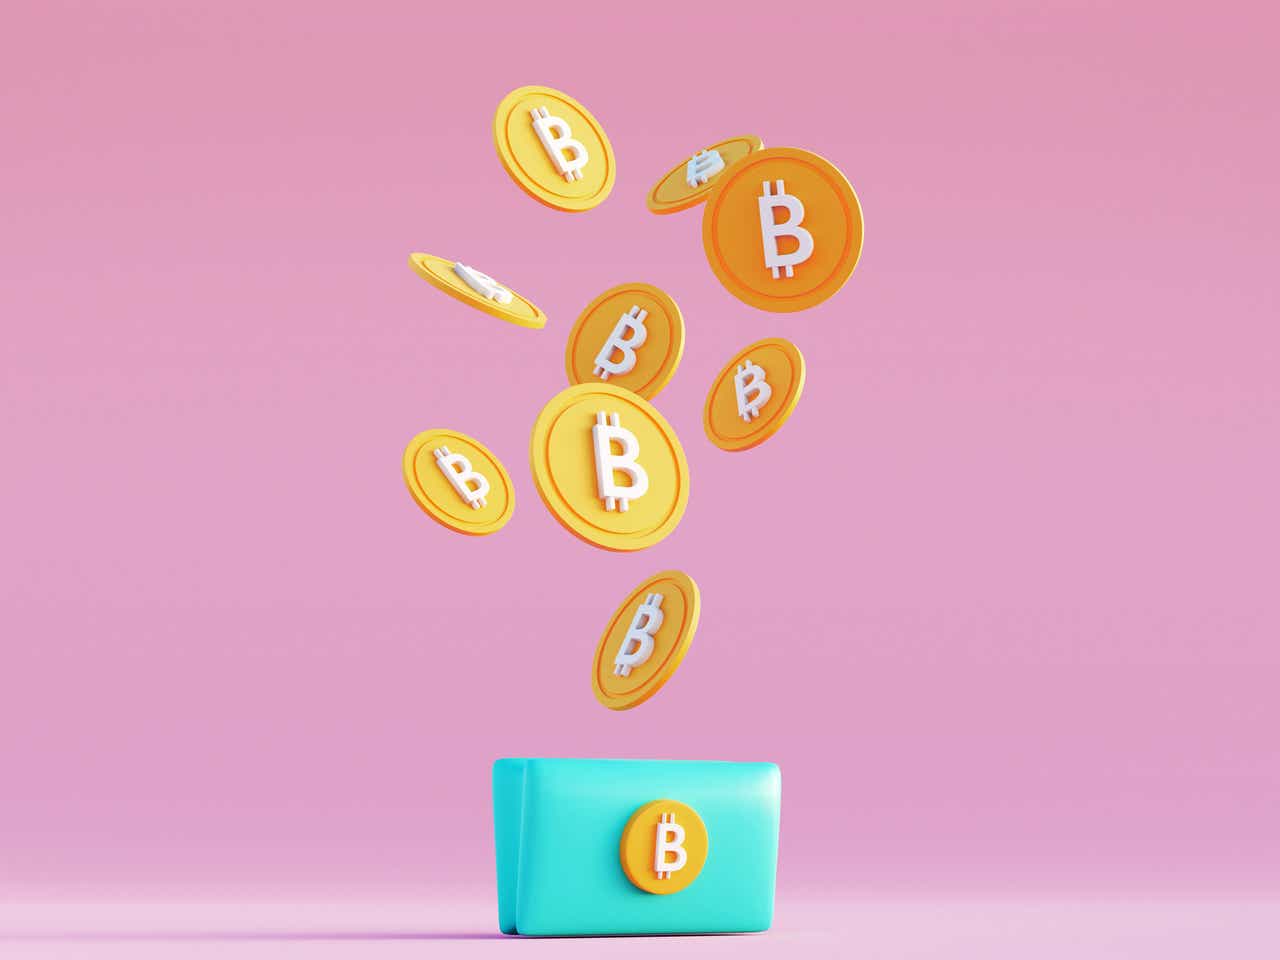 BTCS to offer dividend payable in bitcoin in two weeks | Seeking Alpha